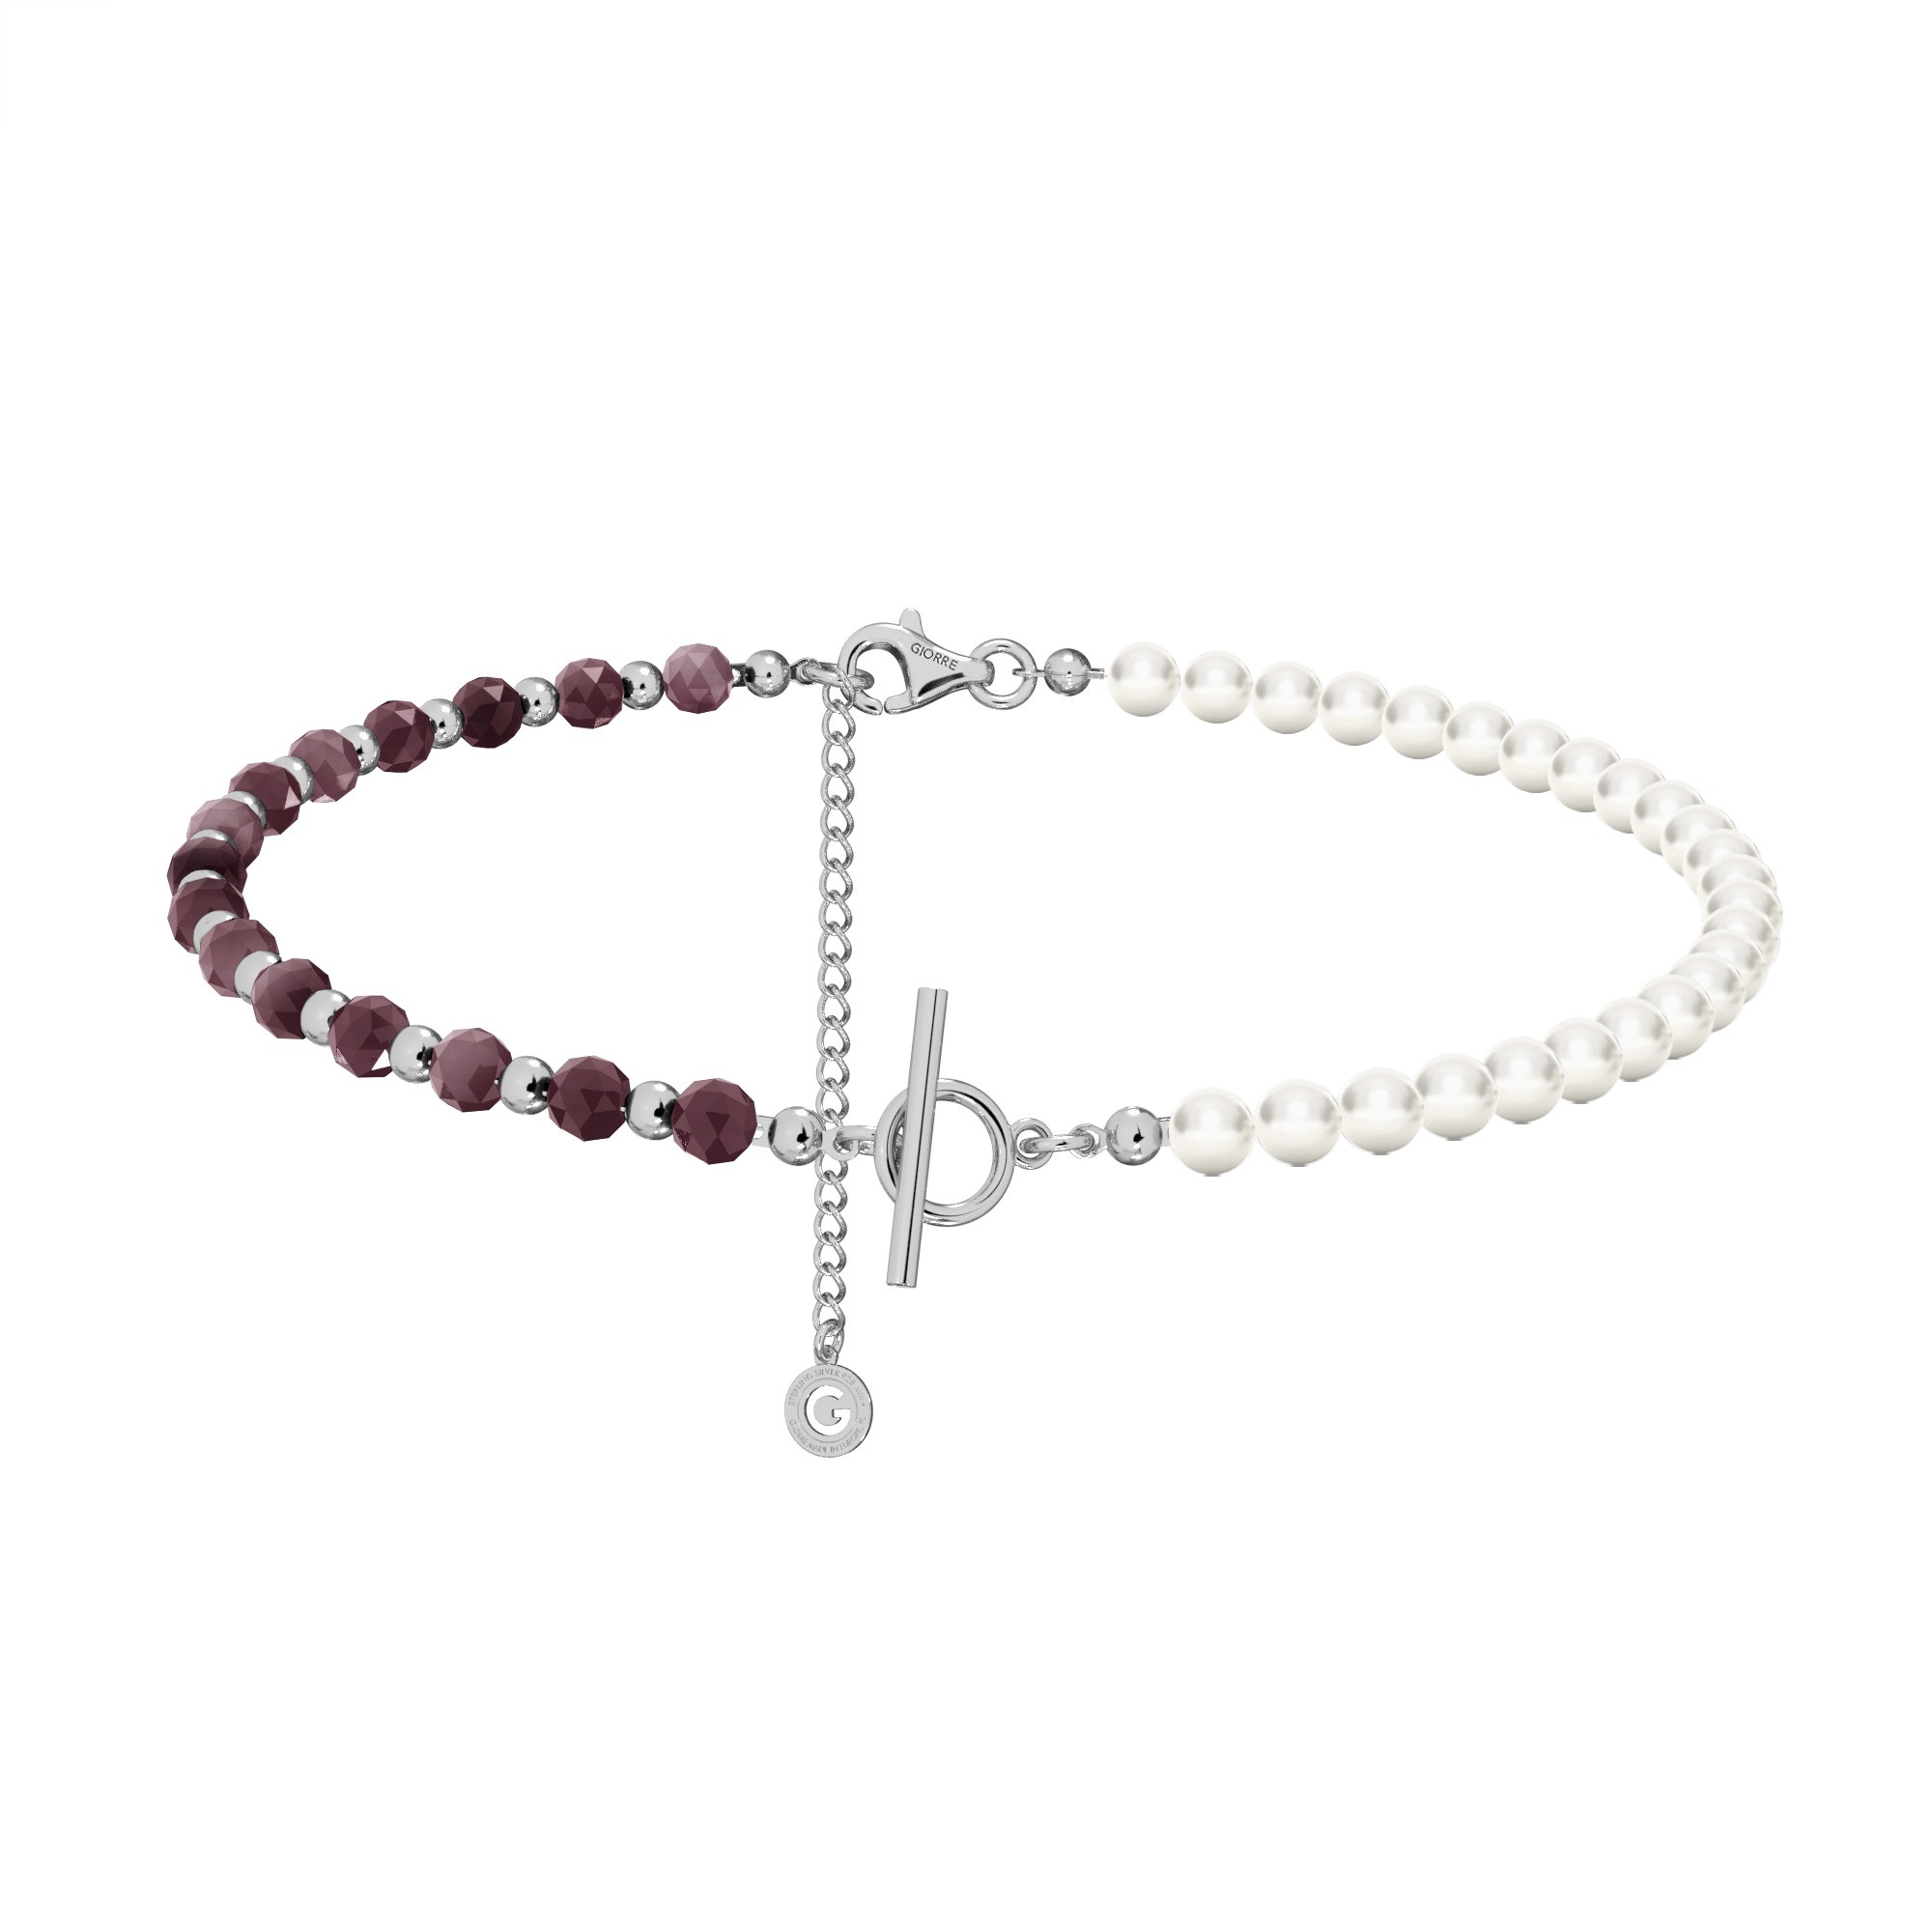 Ruby pearl choker charms base, sterling silver 925